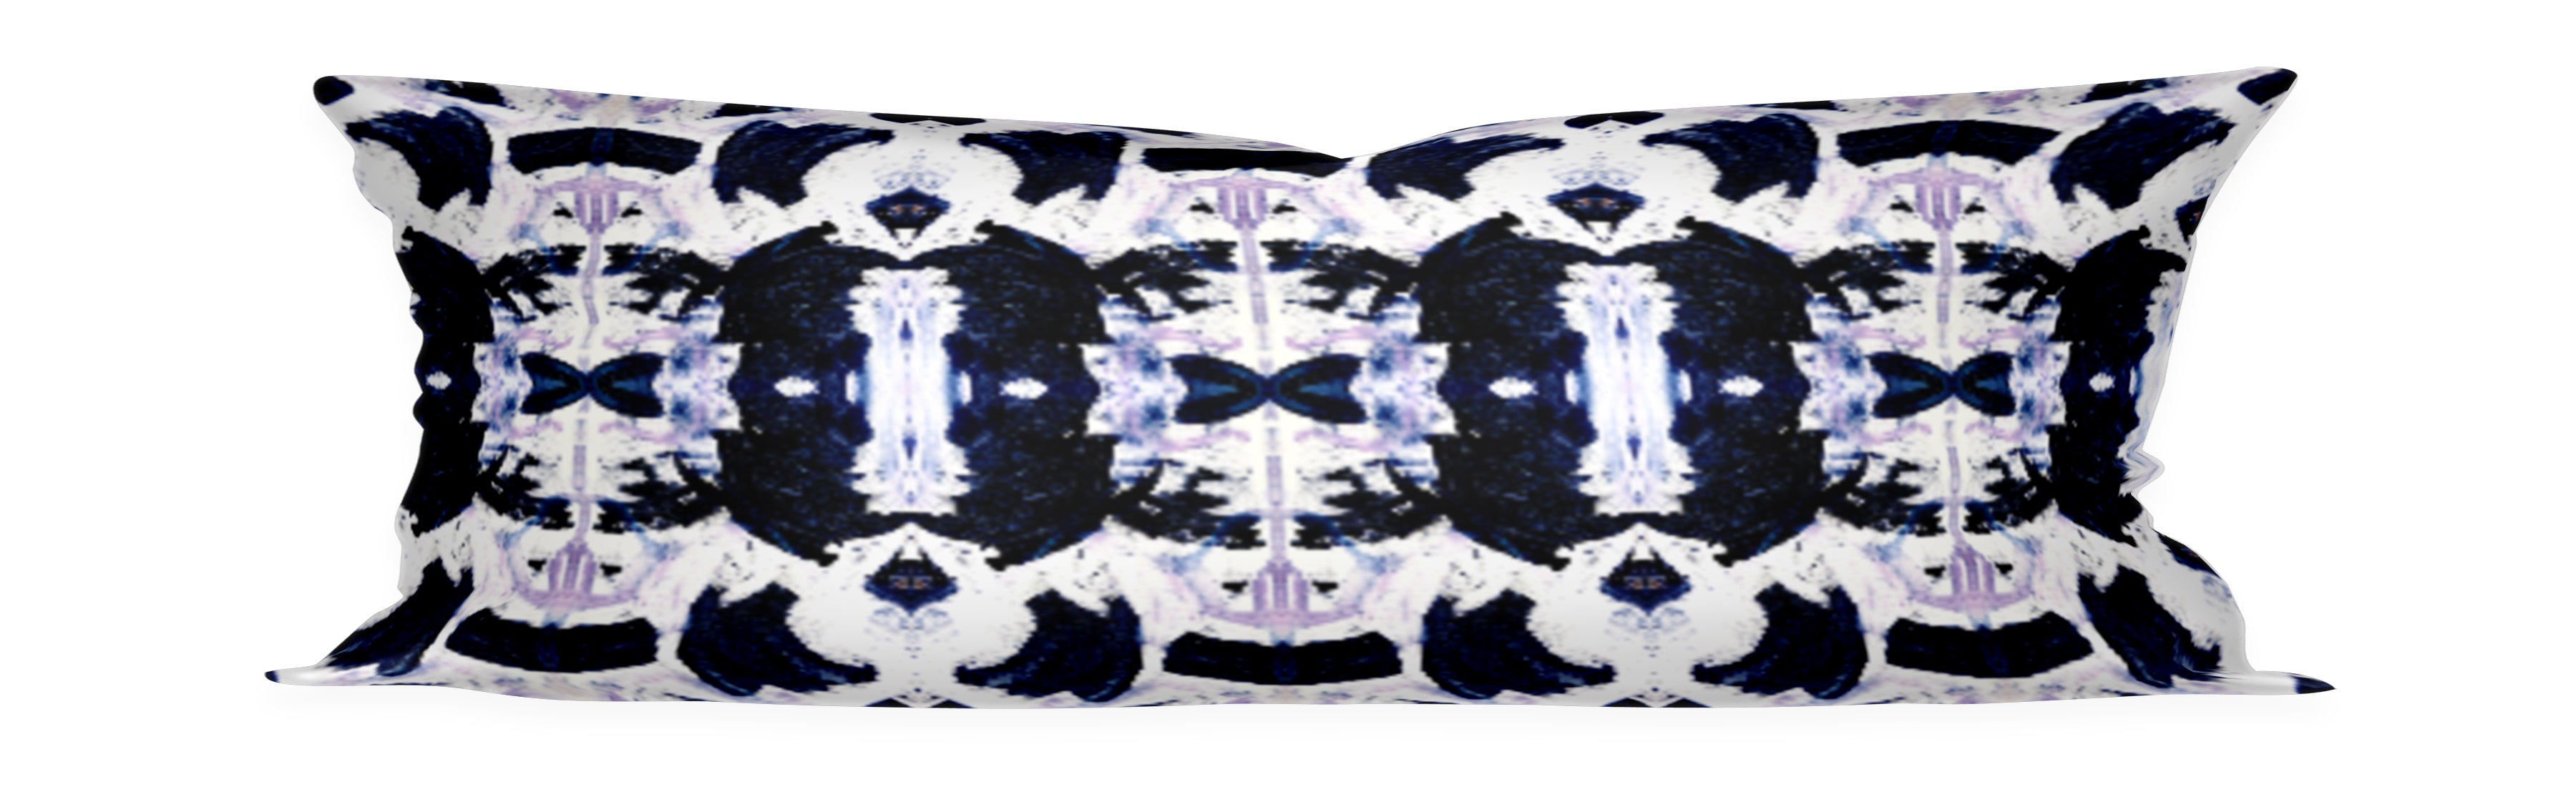 black violet pillow cover, painterly pillow cover black brush strokes, black and purple bed lumbar, long bed pillow black